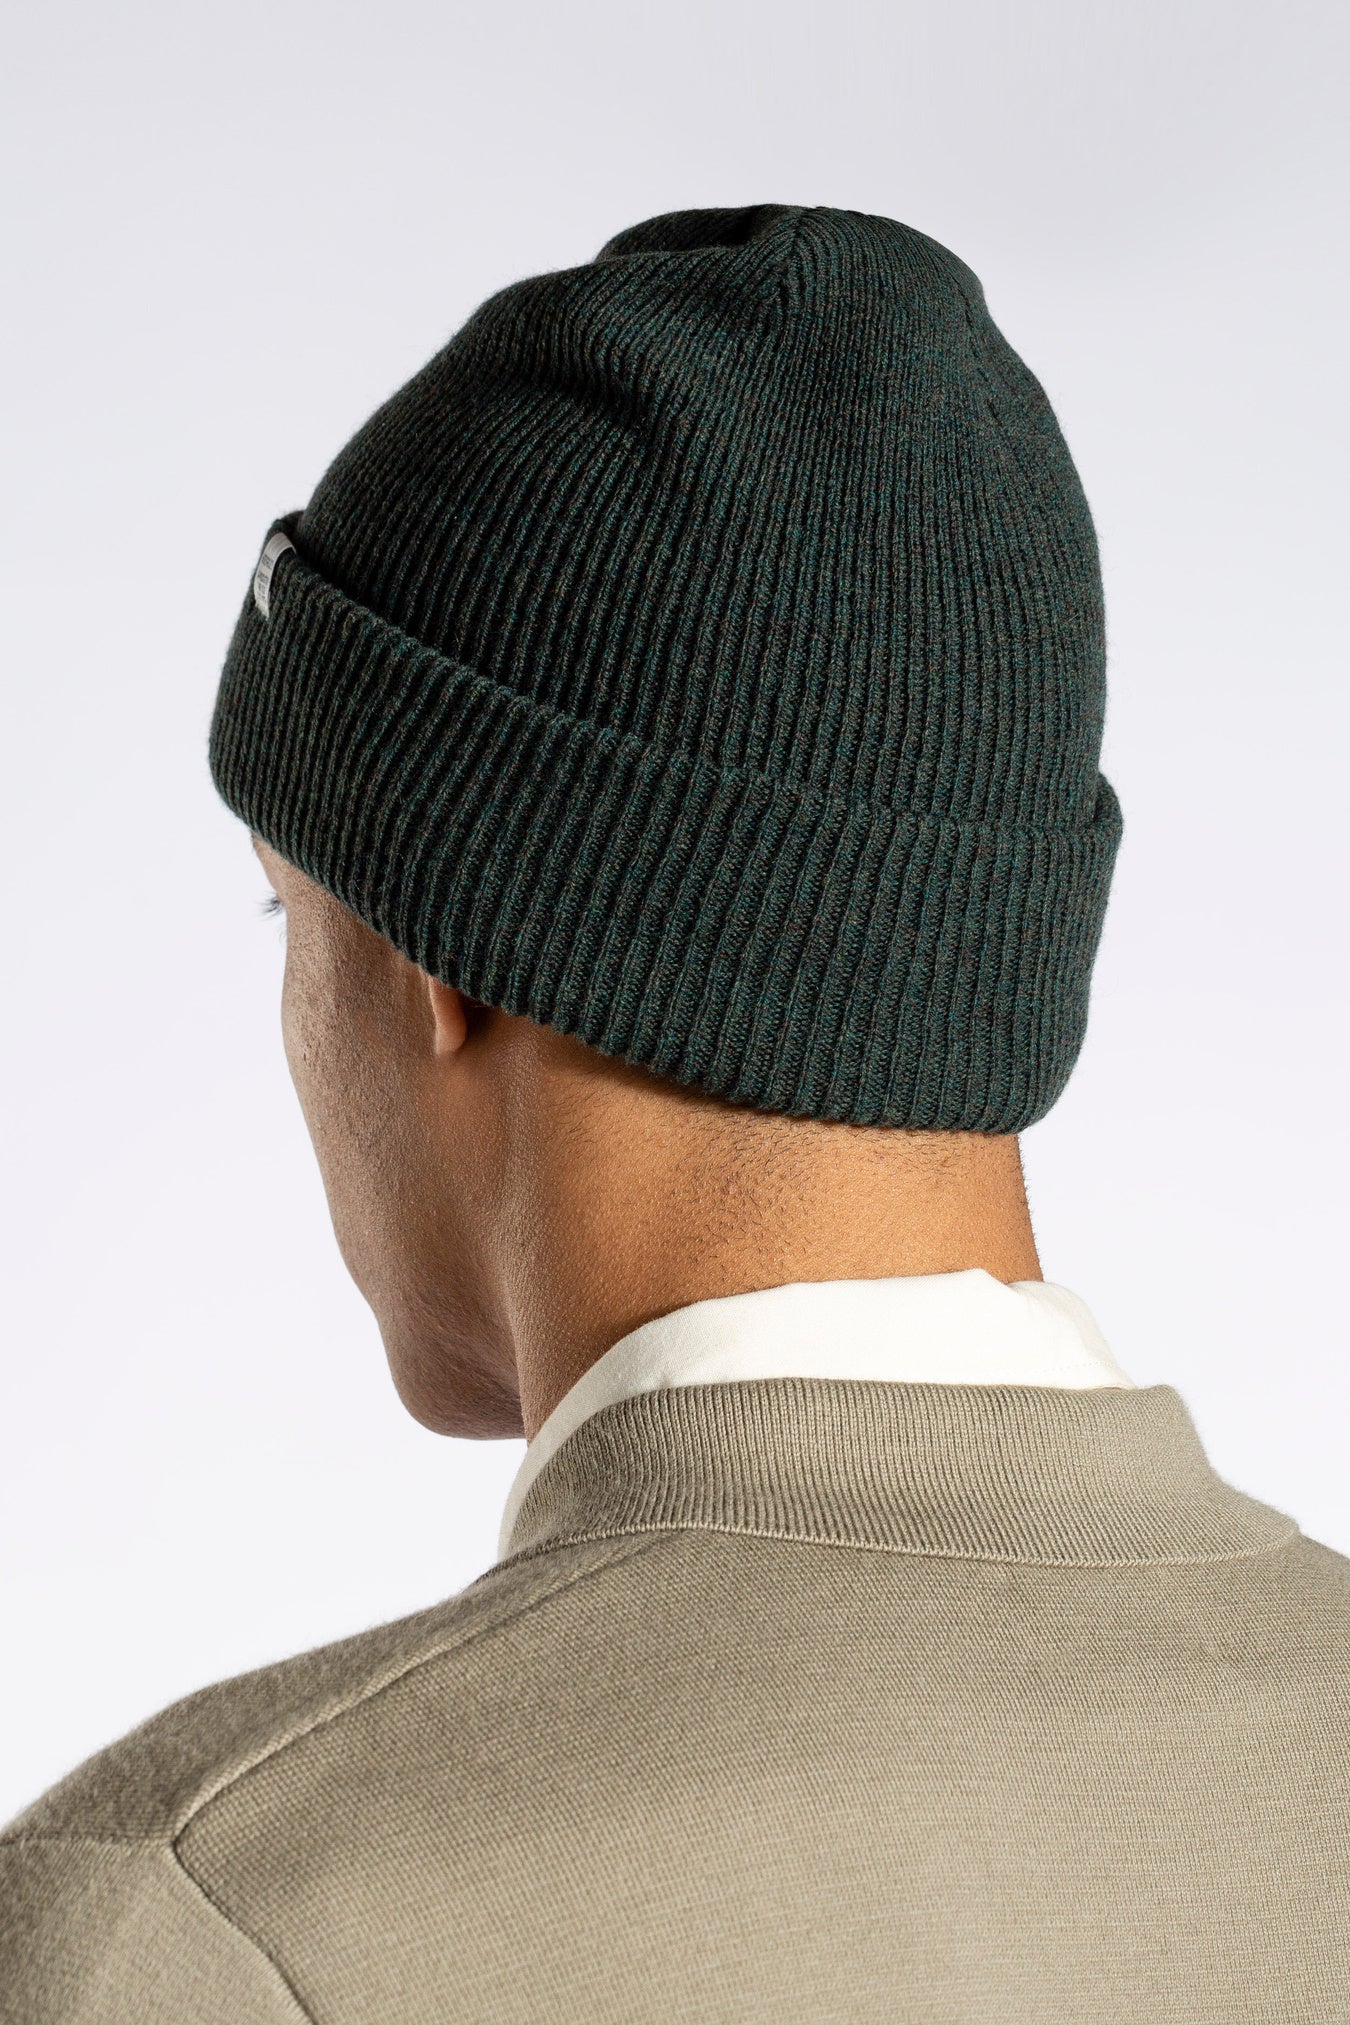 NORSE LAMBSWOOL BEANIE - FOREST GREEN